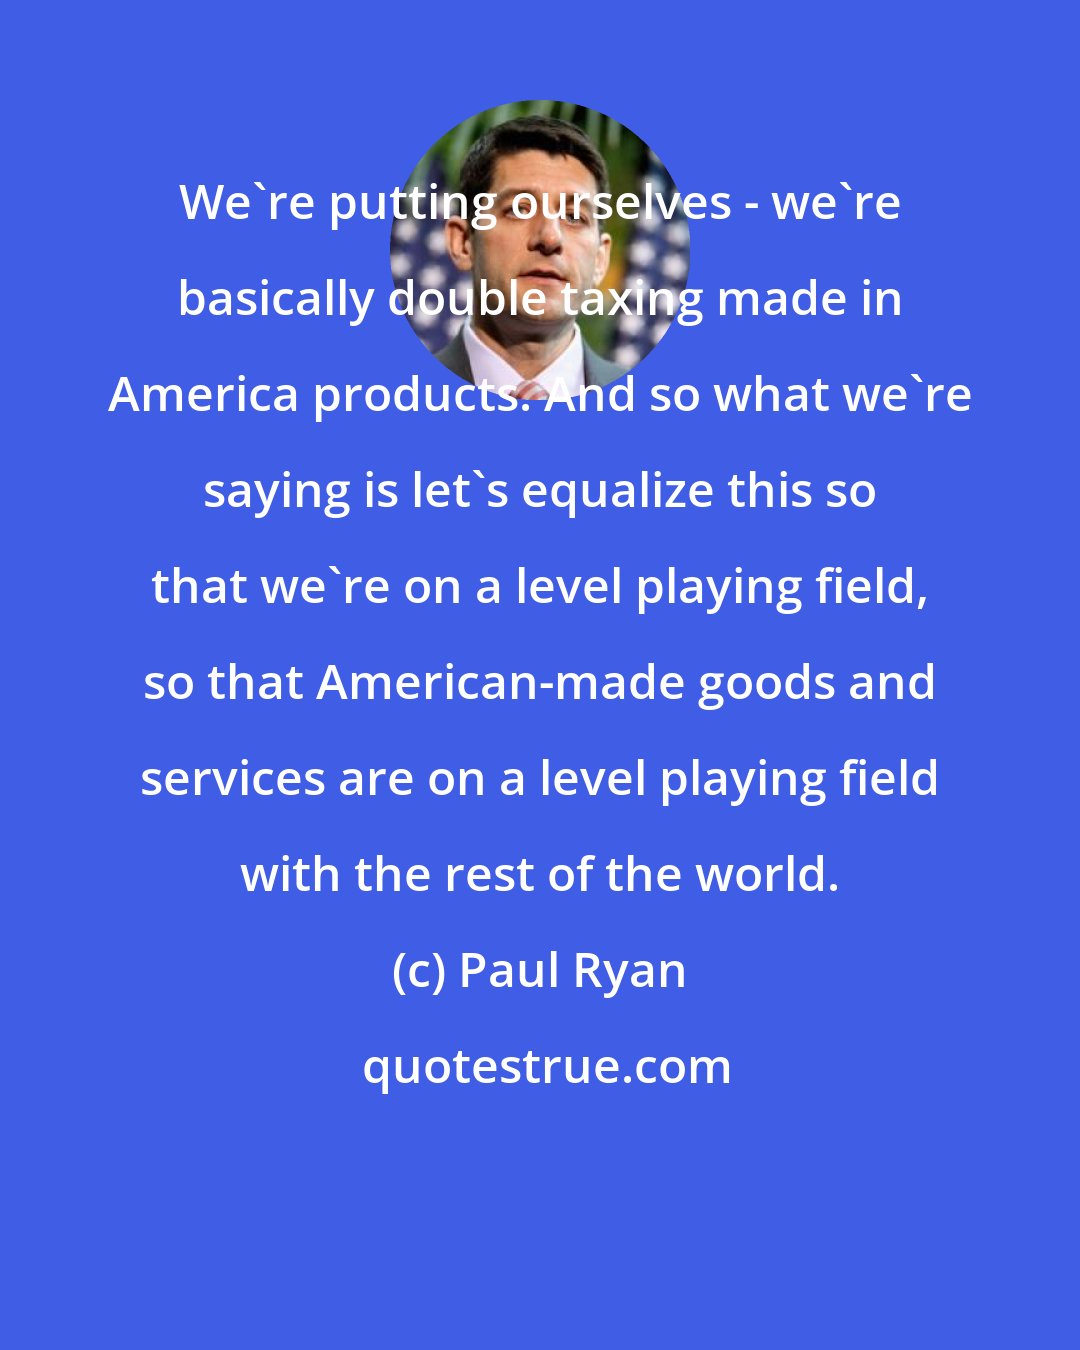 Paul Ryan: We`re putting ourselves - we`re basically double taxing made in America products. And so what we`re saying is let`s equalize this so that we`re on a level playing field, so that American-made goods and services are on a level playing field with the rest of the world.